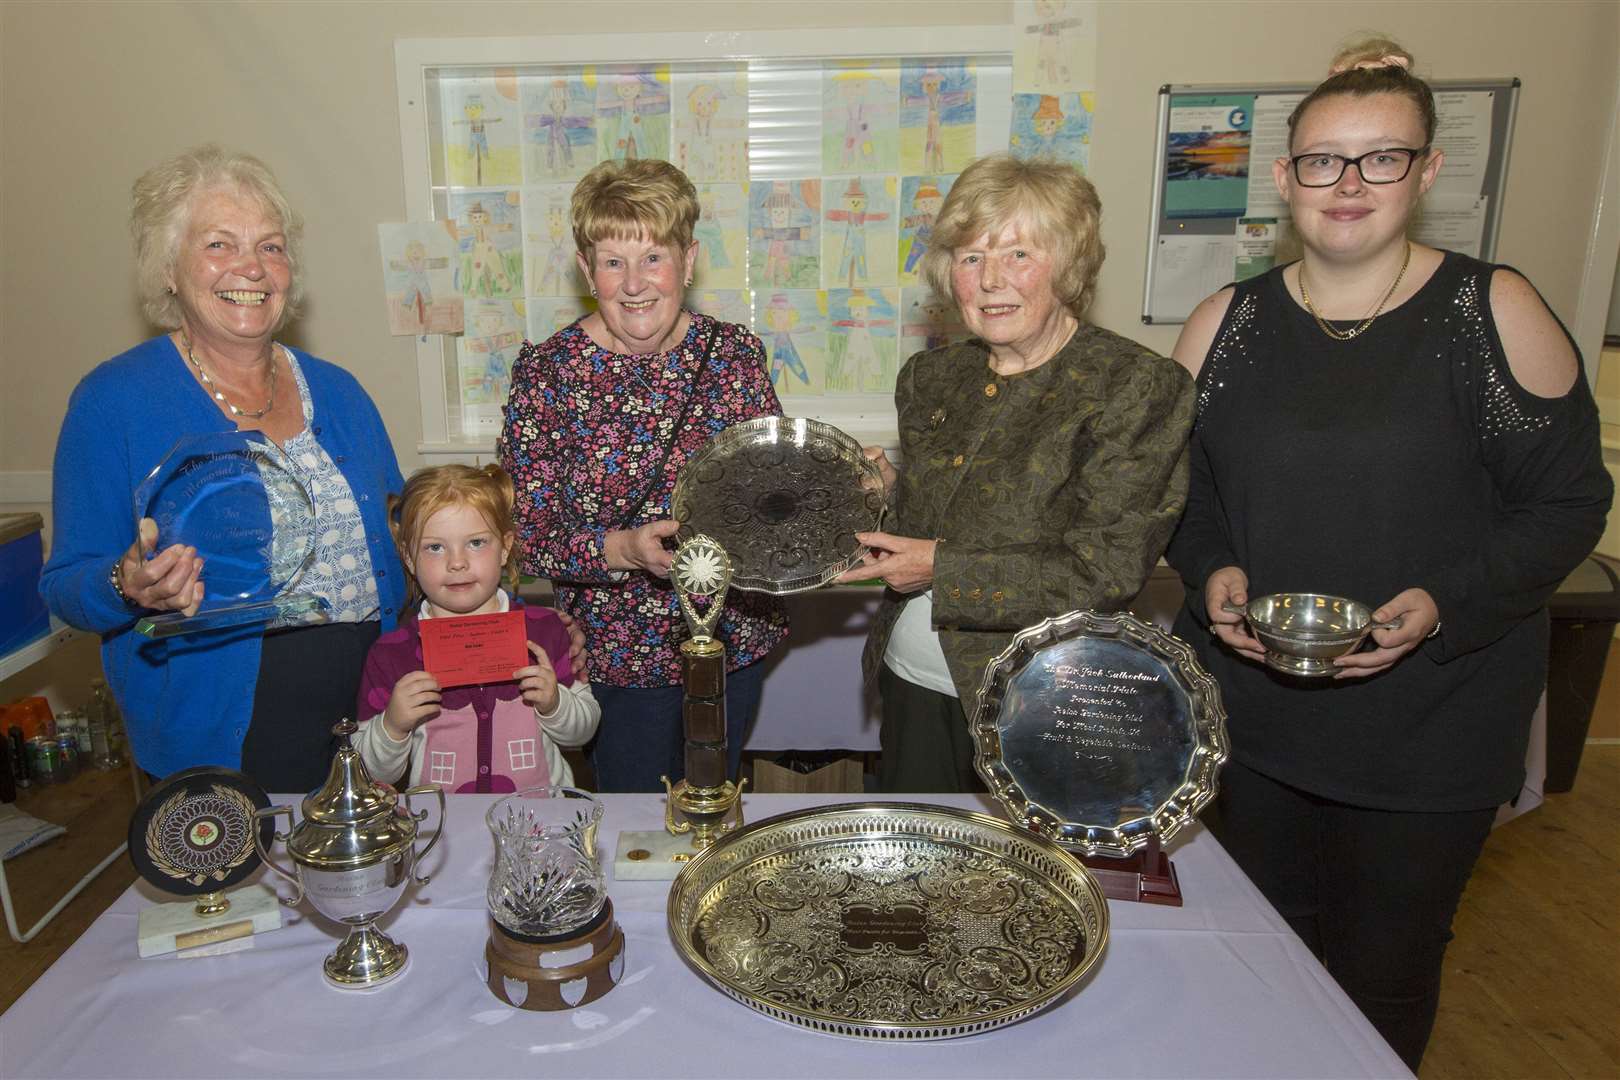 Linda Tait, (centre right), collected an armful of trophies at Reiss Gardening Club's annual show. She is seen here receiving one of her trophies from club chairwoman Annette Sinclair. Looking on are Moira Gunn, (left), who won trophies for cut flowers and floral art, Shannon Martin, (right), who had the best exhibit with a gladioli, and Ayla McAllan who won the junior prizes. Picture: Robert MacDonald/Northern Studios